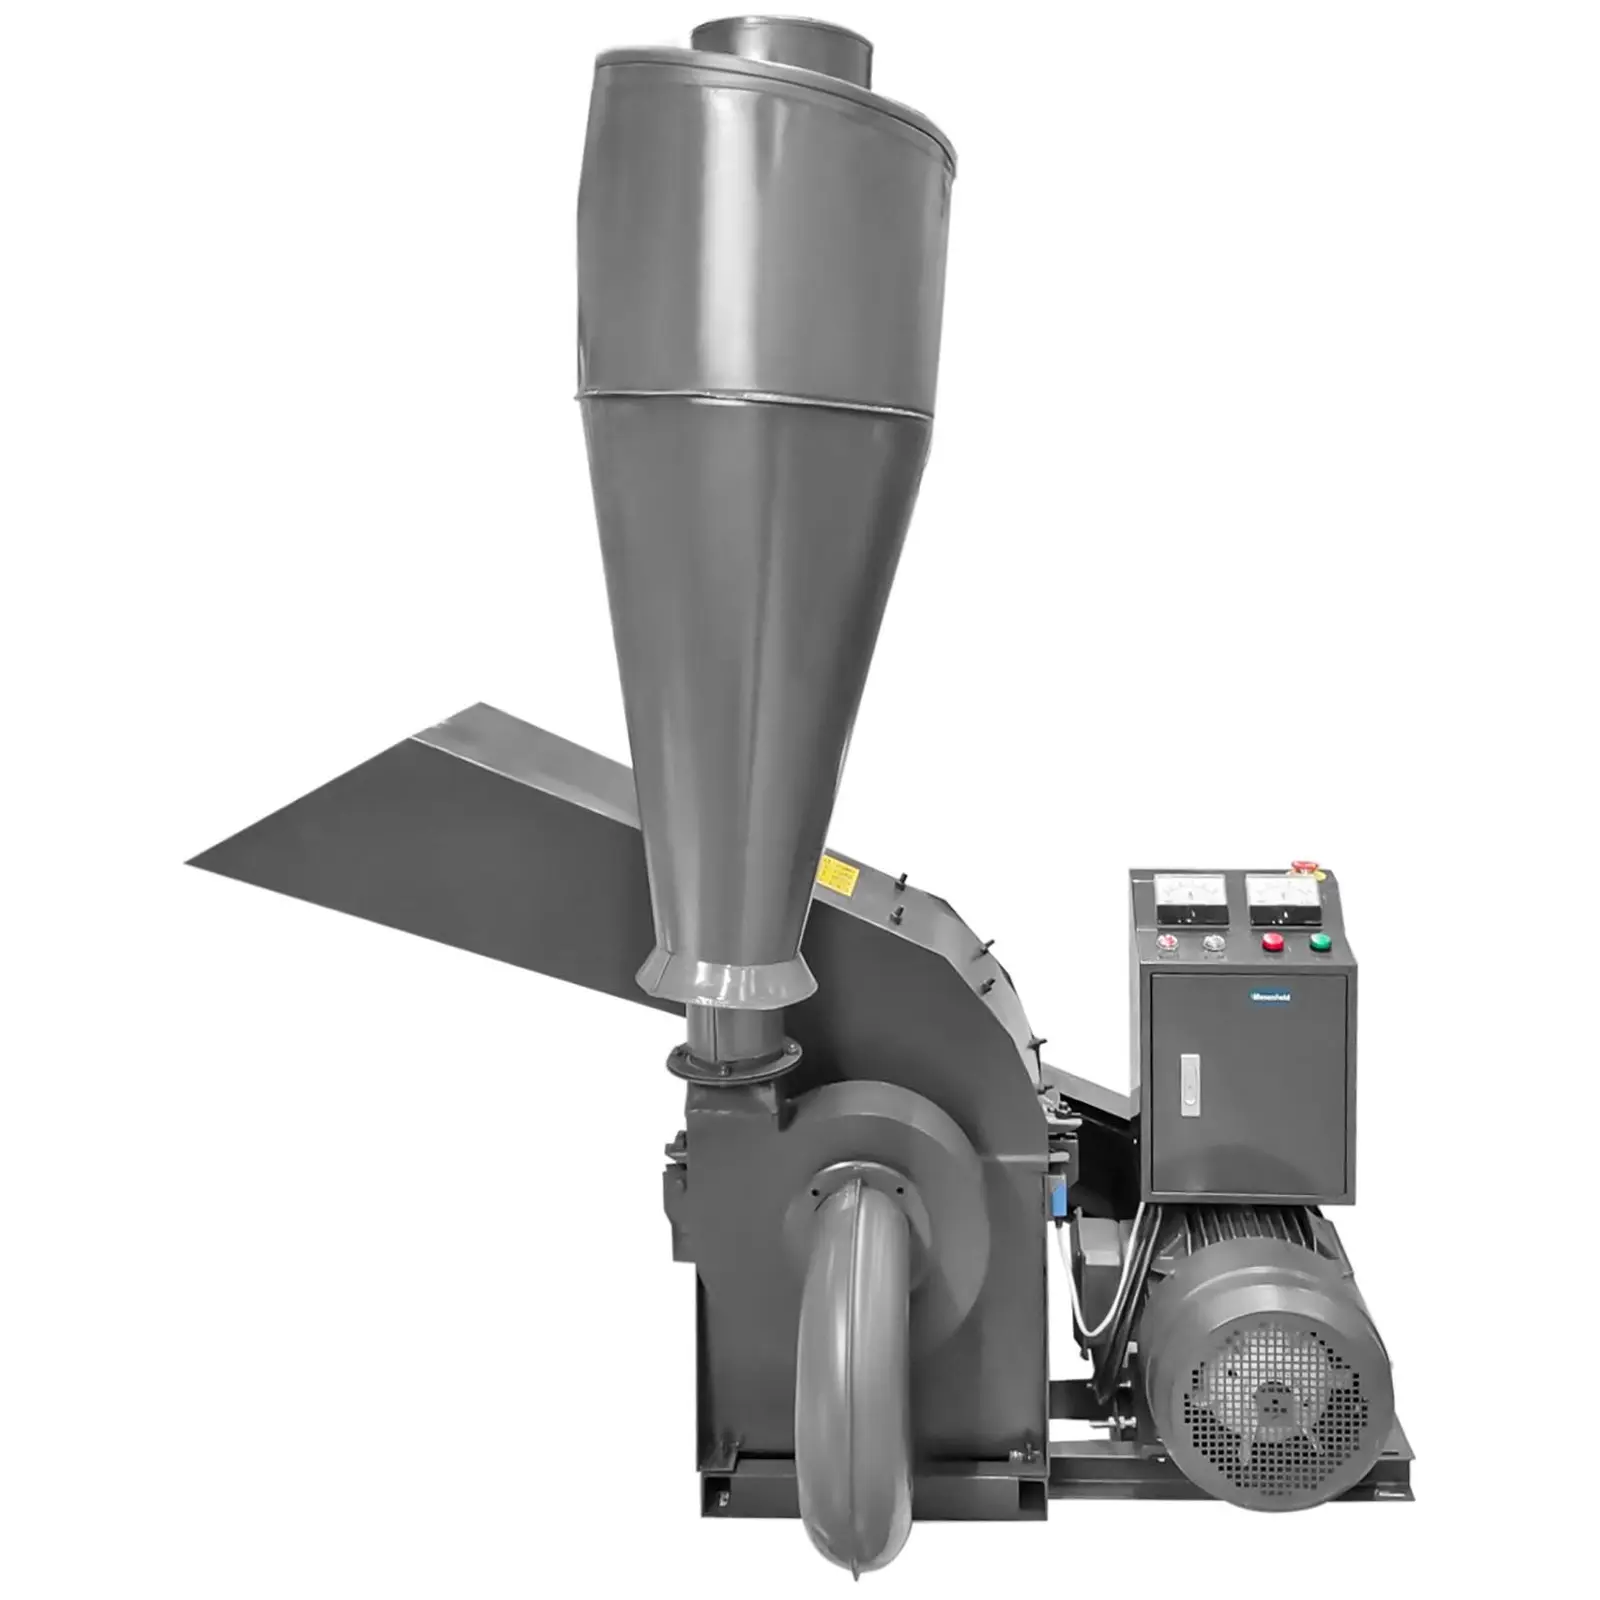 Factory second Hammer Mill - 11 kW - 300 - 700 kg / h